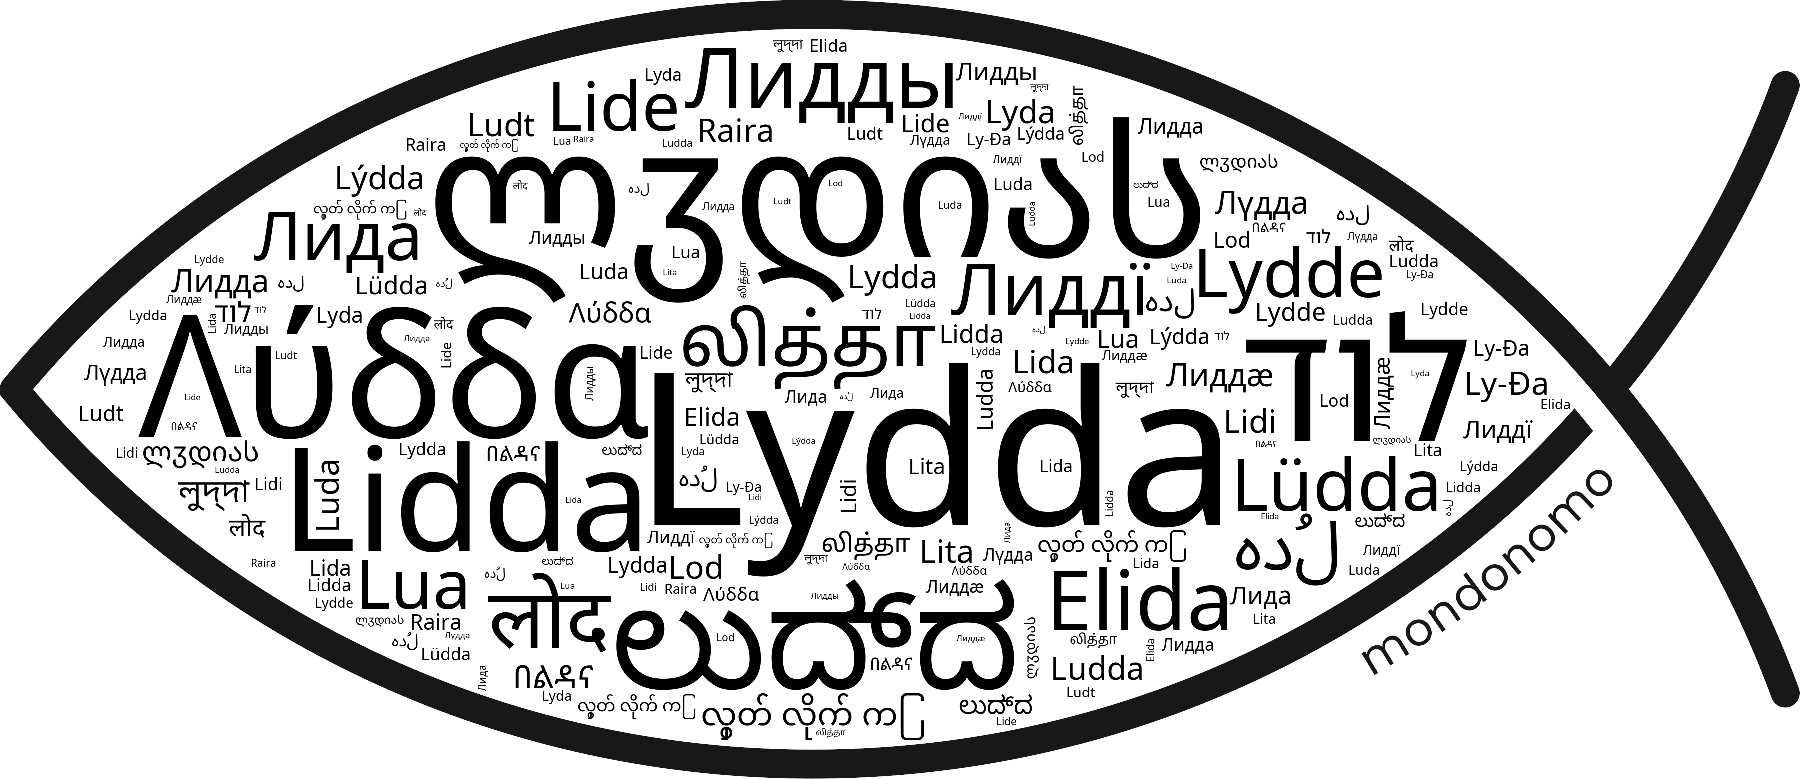 Name Lydda in the world's Bibles